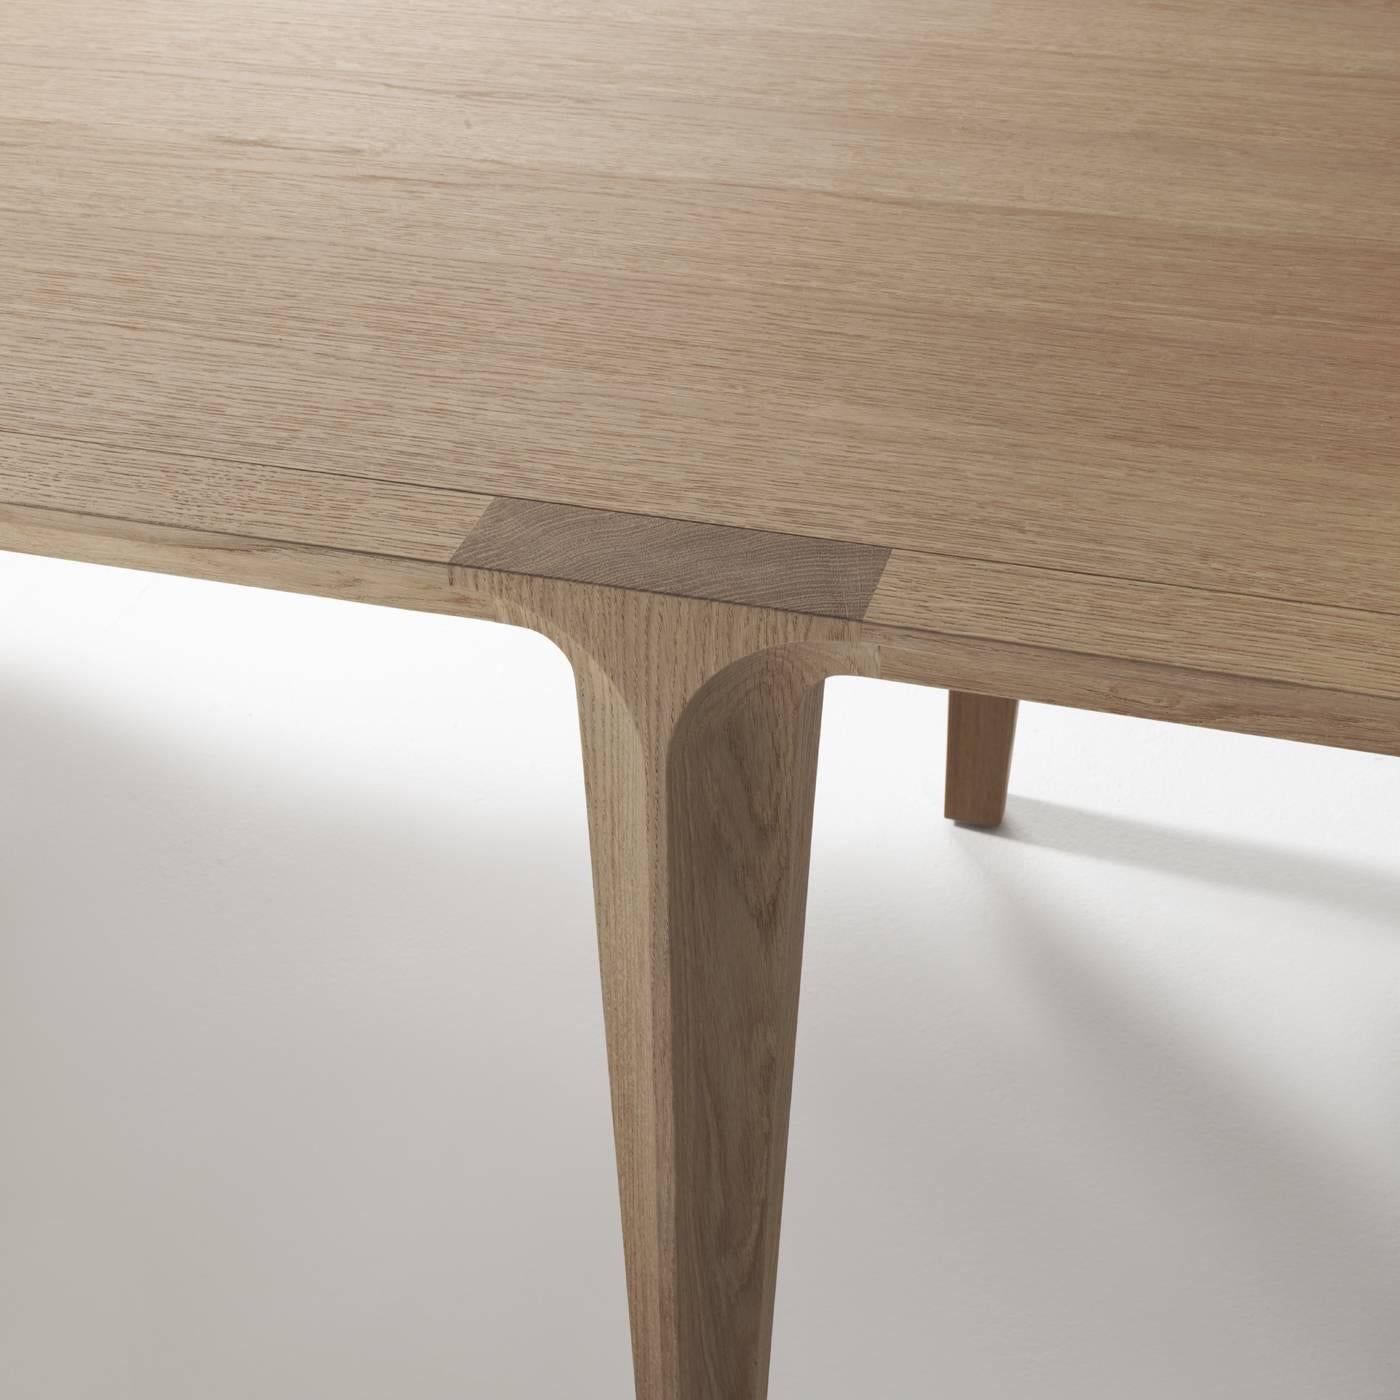 This elegant table is inspired by the architecture of the historic European cities, particularly the rounded arc, typical of Renaissance buildings and cathedrals. The legs are in solid oakwood and the top in oakwood, but this piece is also available